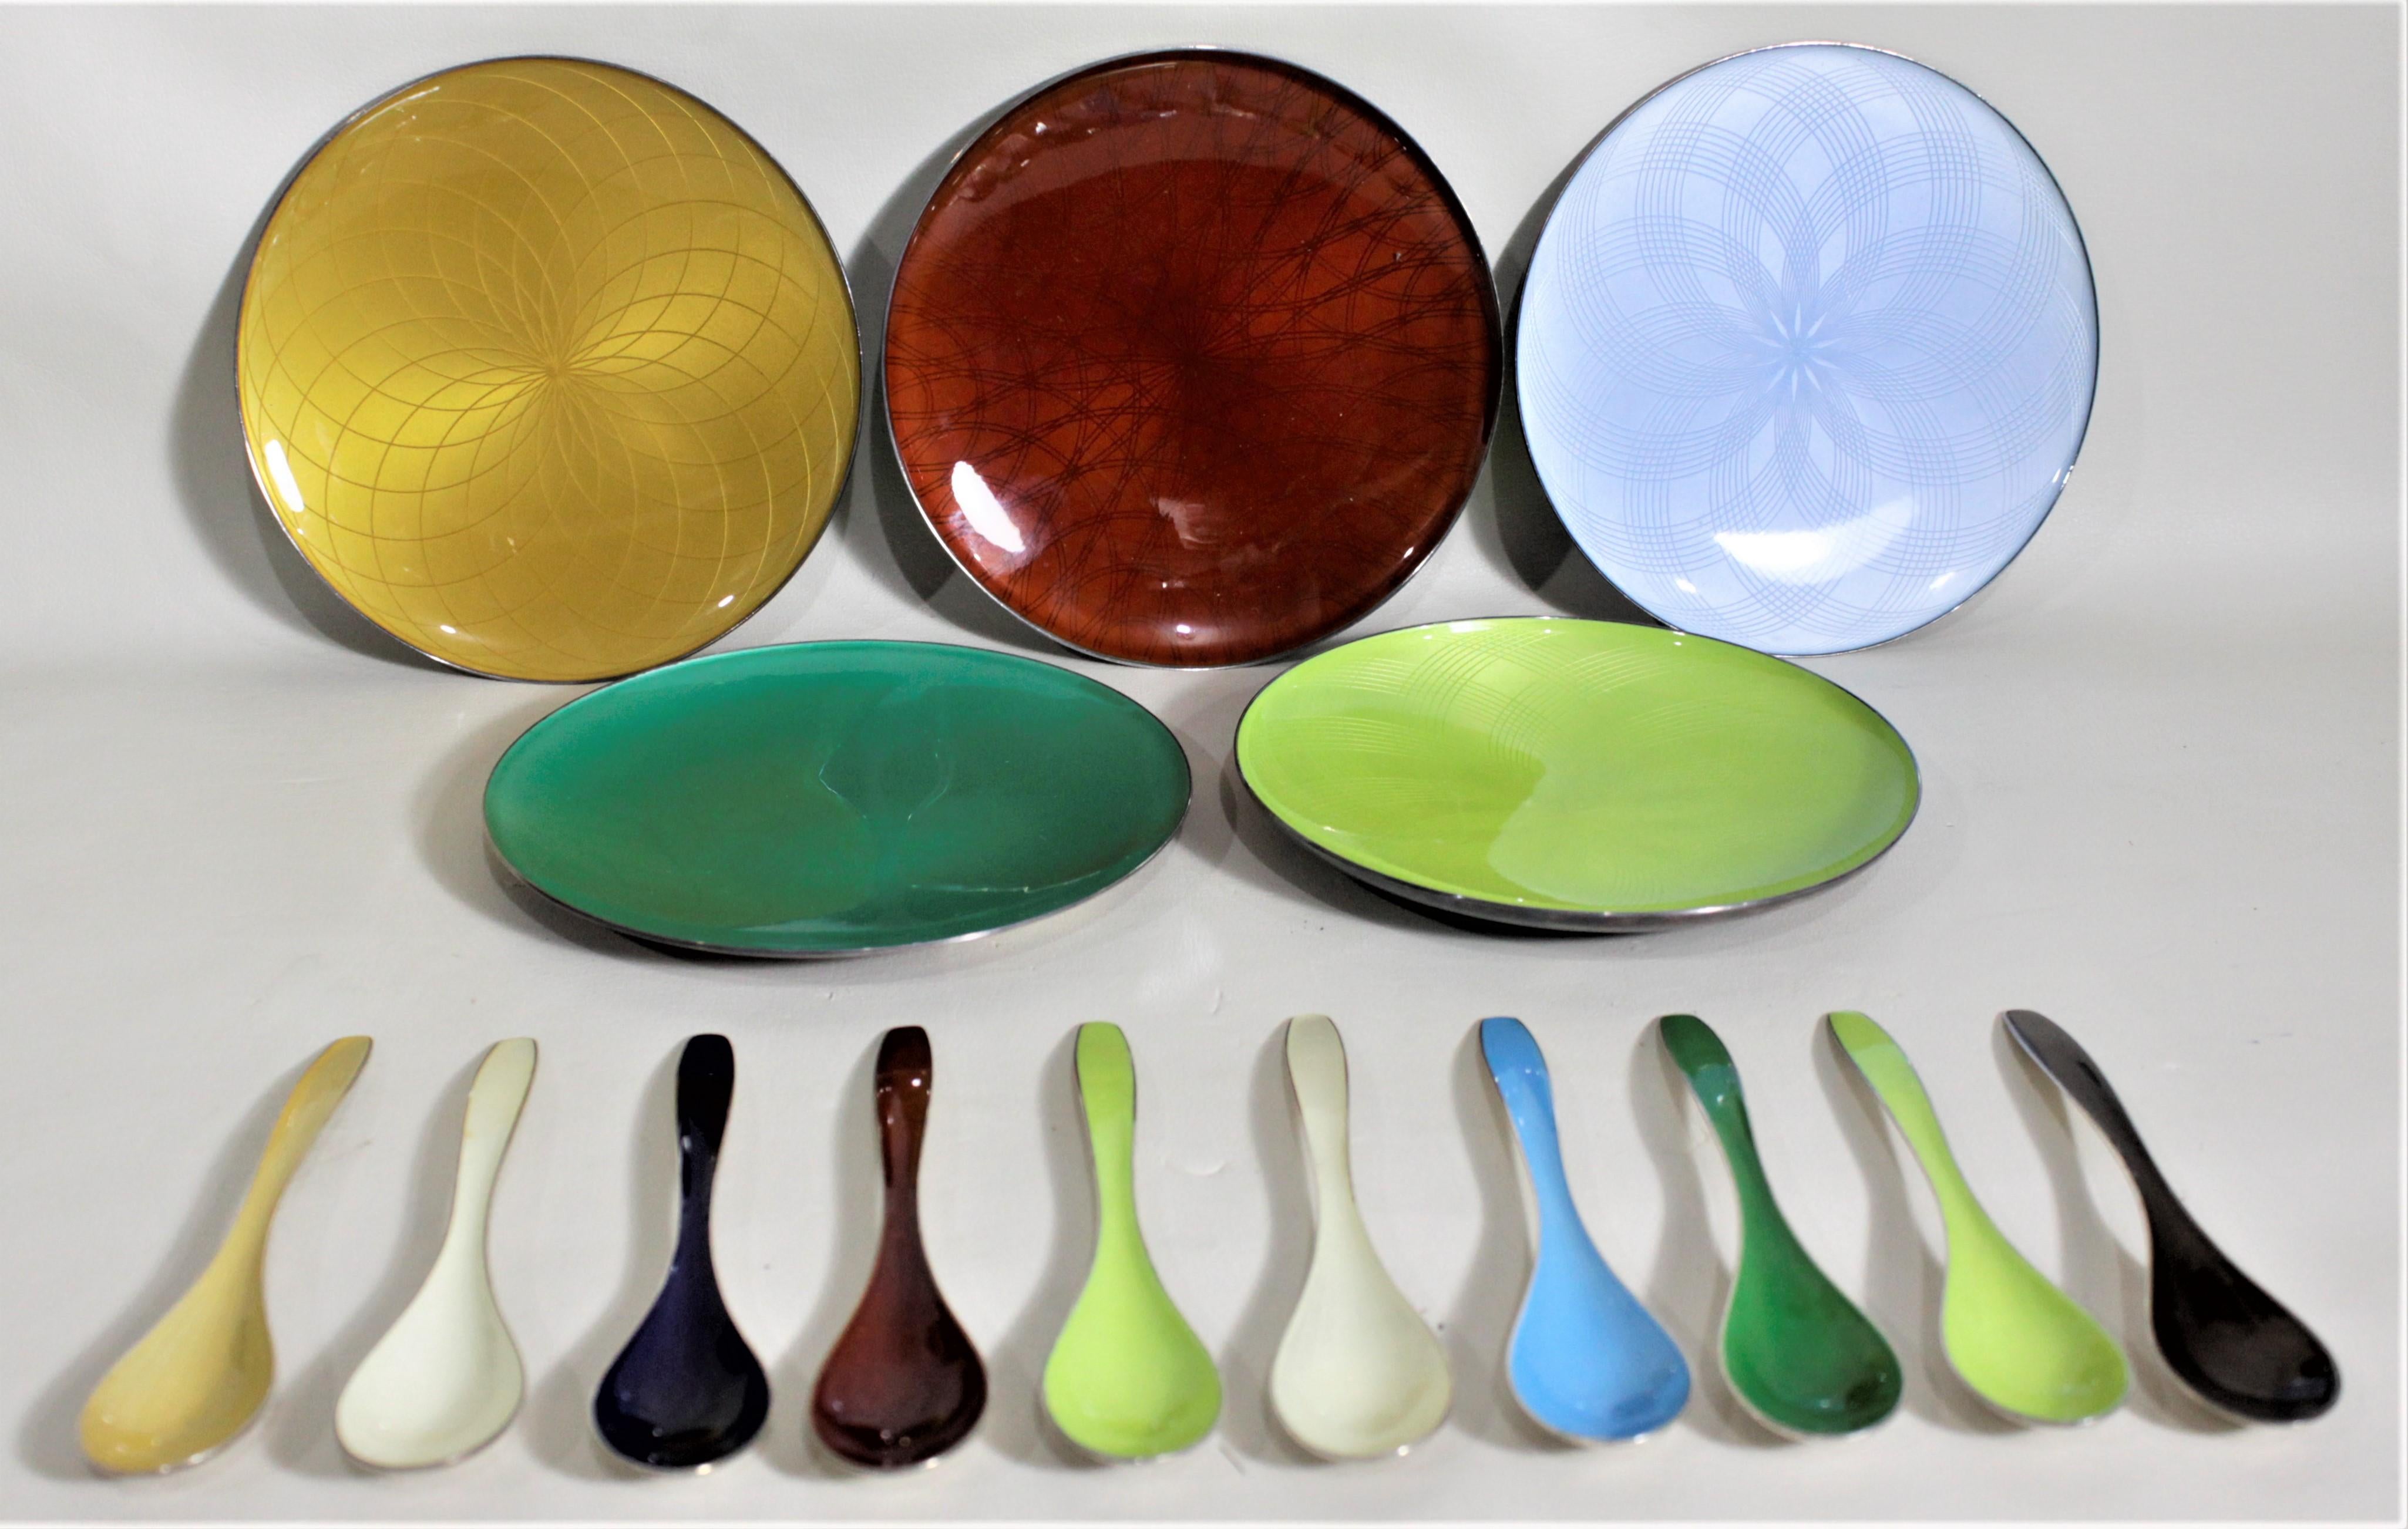 This set of ten enameled sterling silver spoons and five enameled sterling silver plates were made by J. Tostrup of Norway in circa 1970, in the Mid-Century Modern style. The five serving plates, or shallow bowls, are of differing vibrant colors and